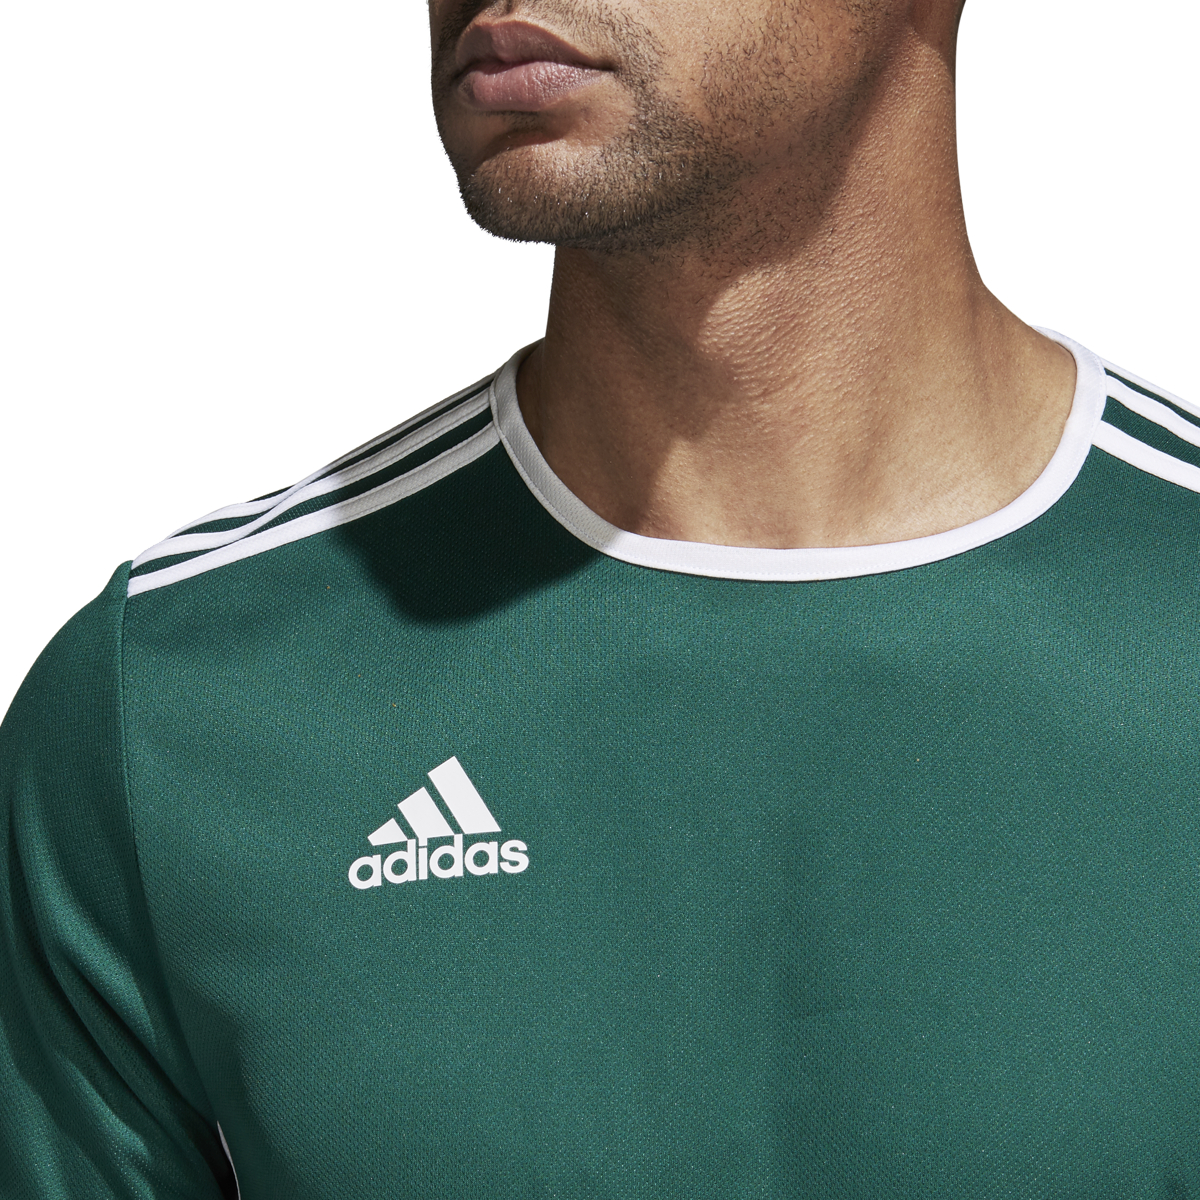 Adidas Men's Soccer Entrada 18 Jersey Adidas - Ships Directly From Adidas - image 4 of 6